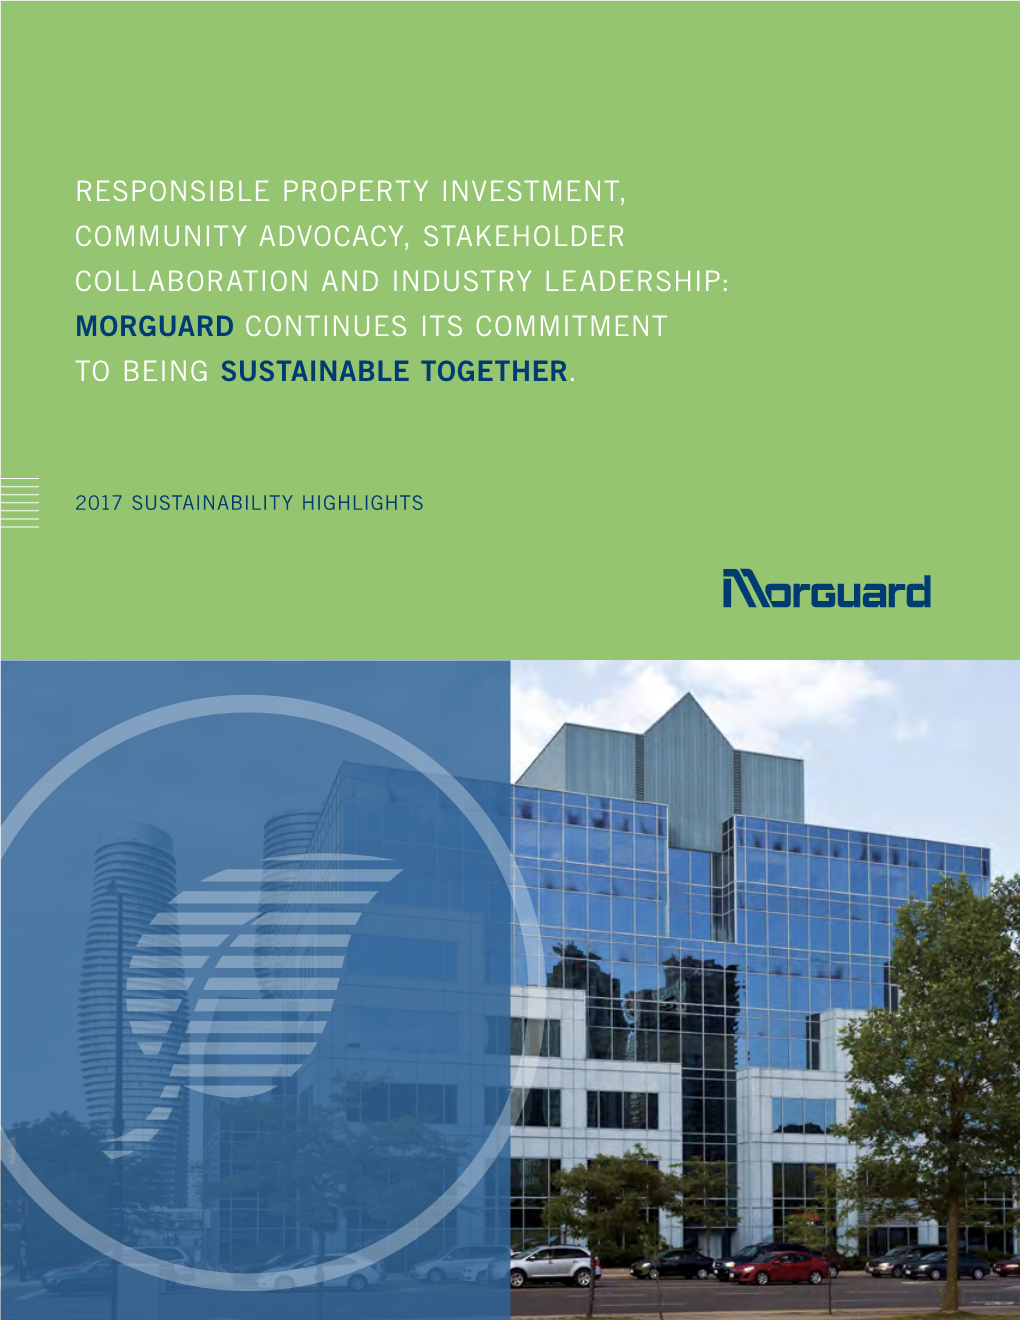 Morguard Continues Its Commitment to Being Sustainable Together